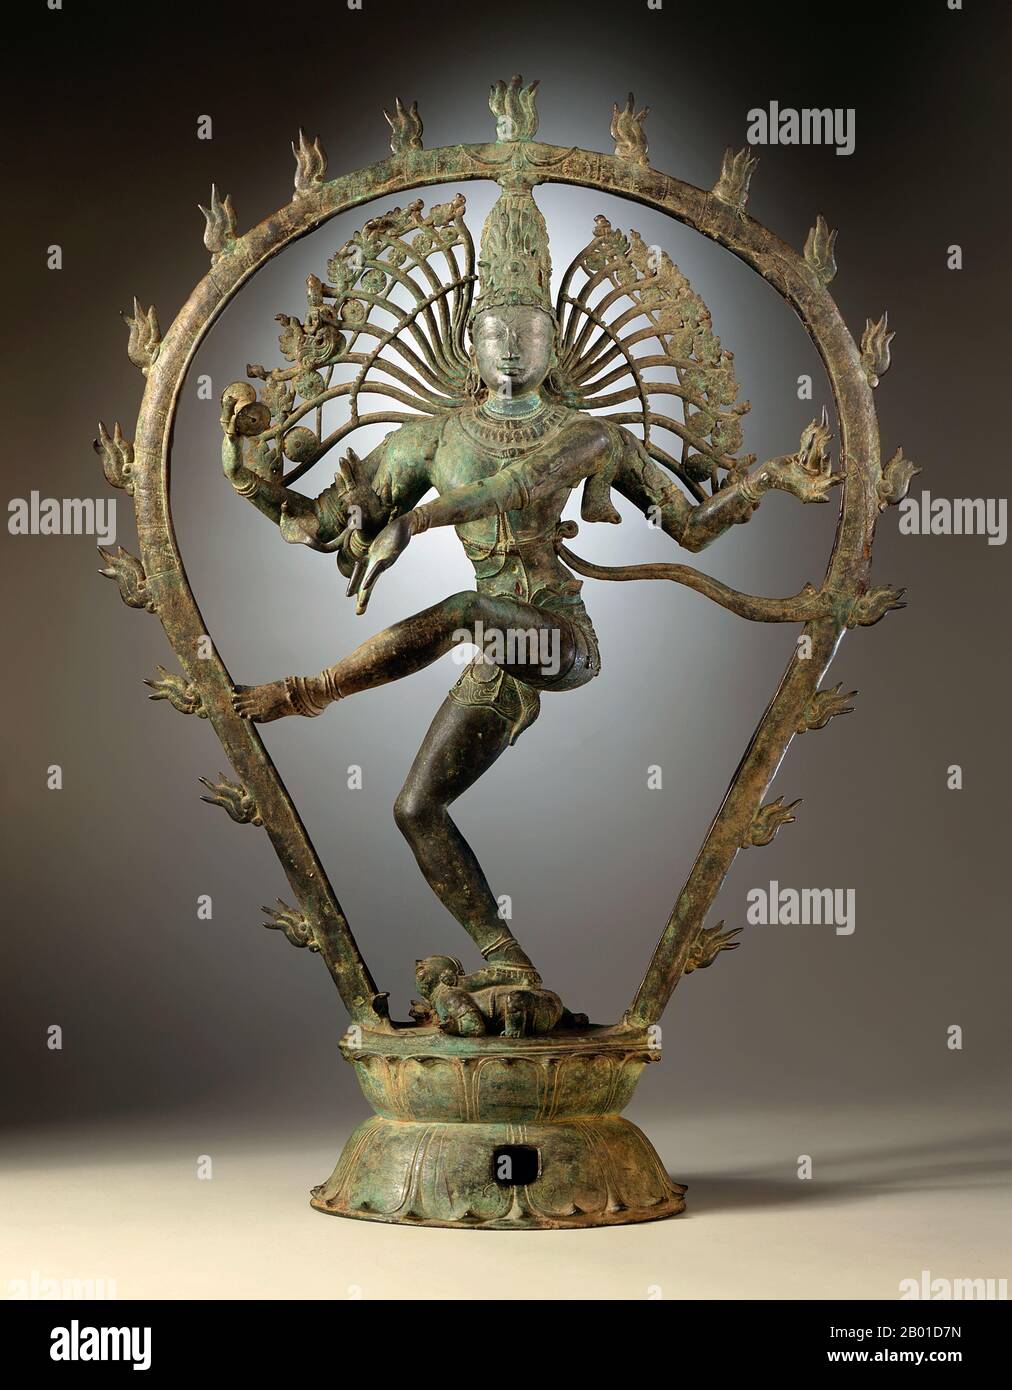 India: Shiva Nataraja or 'Dancing Shiva'. Copper alloy statuette from Tamil Nadu, Chola Dynasty, c. 950-1000 CE.  Nataraja or Nataraj ('The Lord (or King) of Dance'; Tamil: Kooththan) is a depiction of the Hindu god Shiva as the cosmic dancer Koothan who performs his divine dance to destroy a weary universe and make preparations for the god Brahma to start the process of creation.  A Tamil concept, Shiva was first depicted as Nataraja in the famous Chola bronzes and sculptures of Chidambaram. Stock Photo